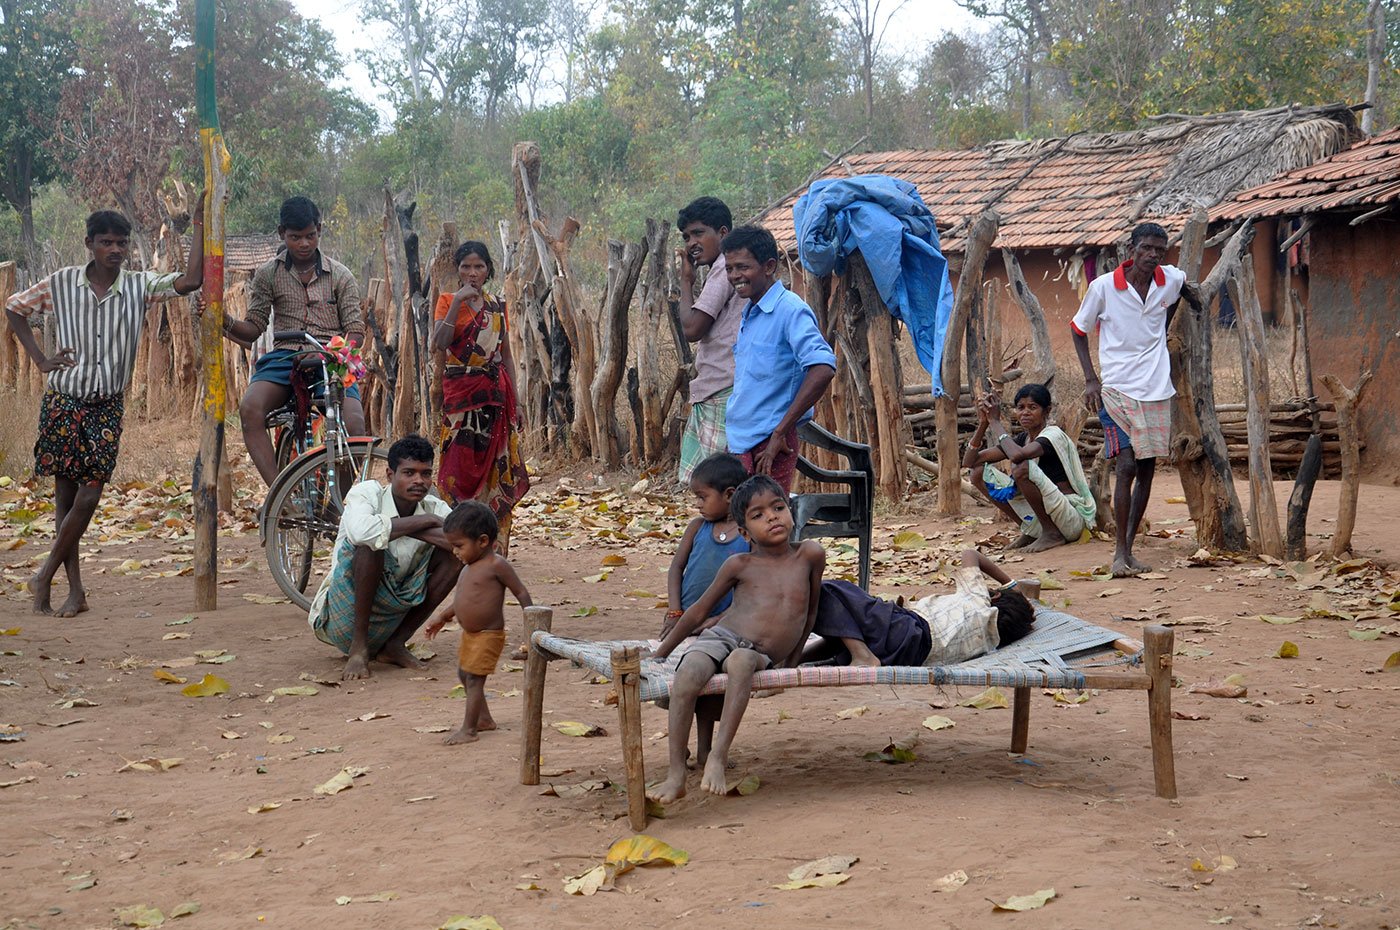 The villagers of settled village who have been migrated from Chhattisgarh at the time of Salwa Judum